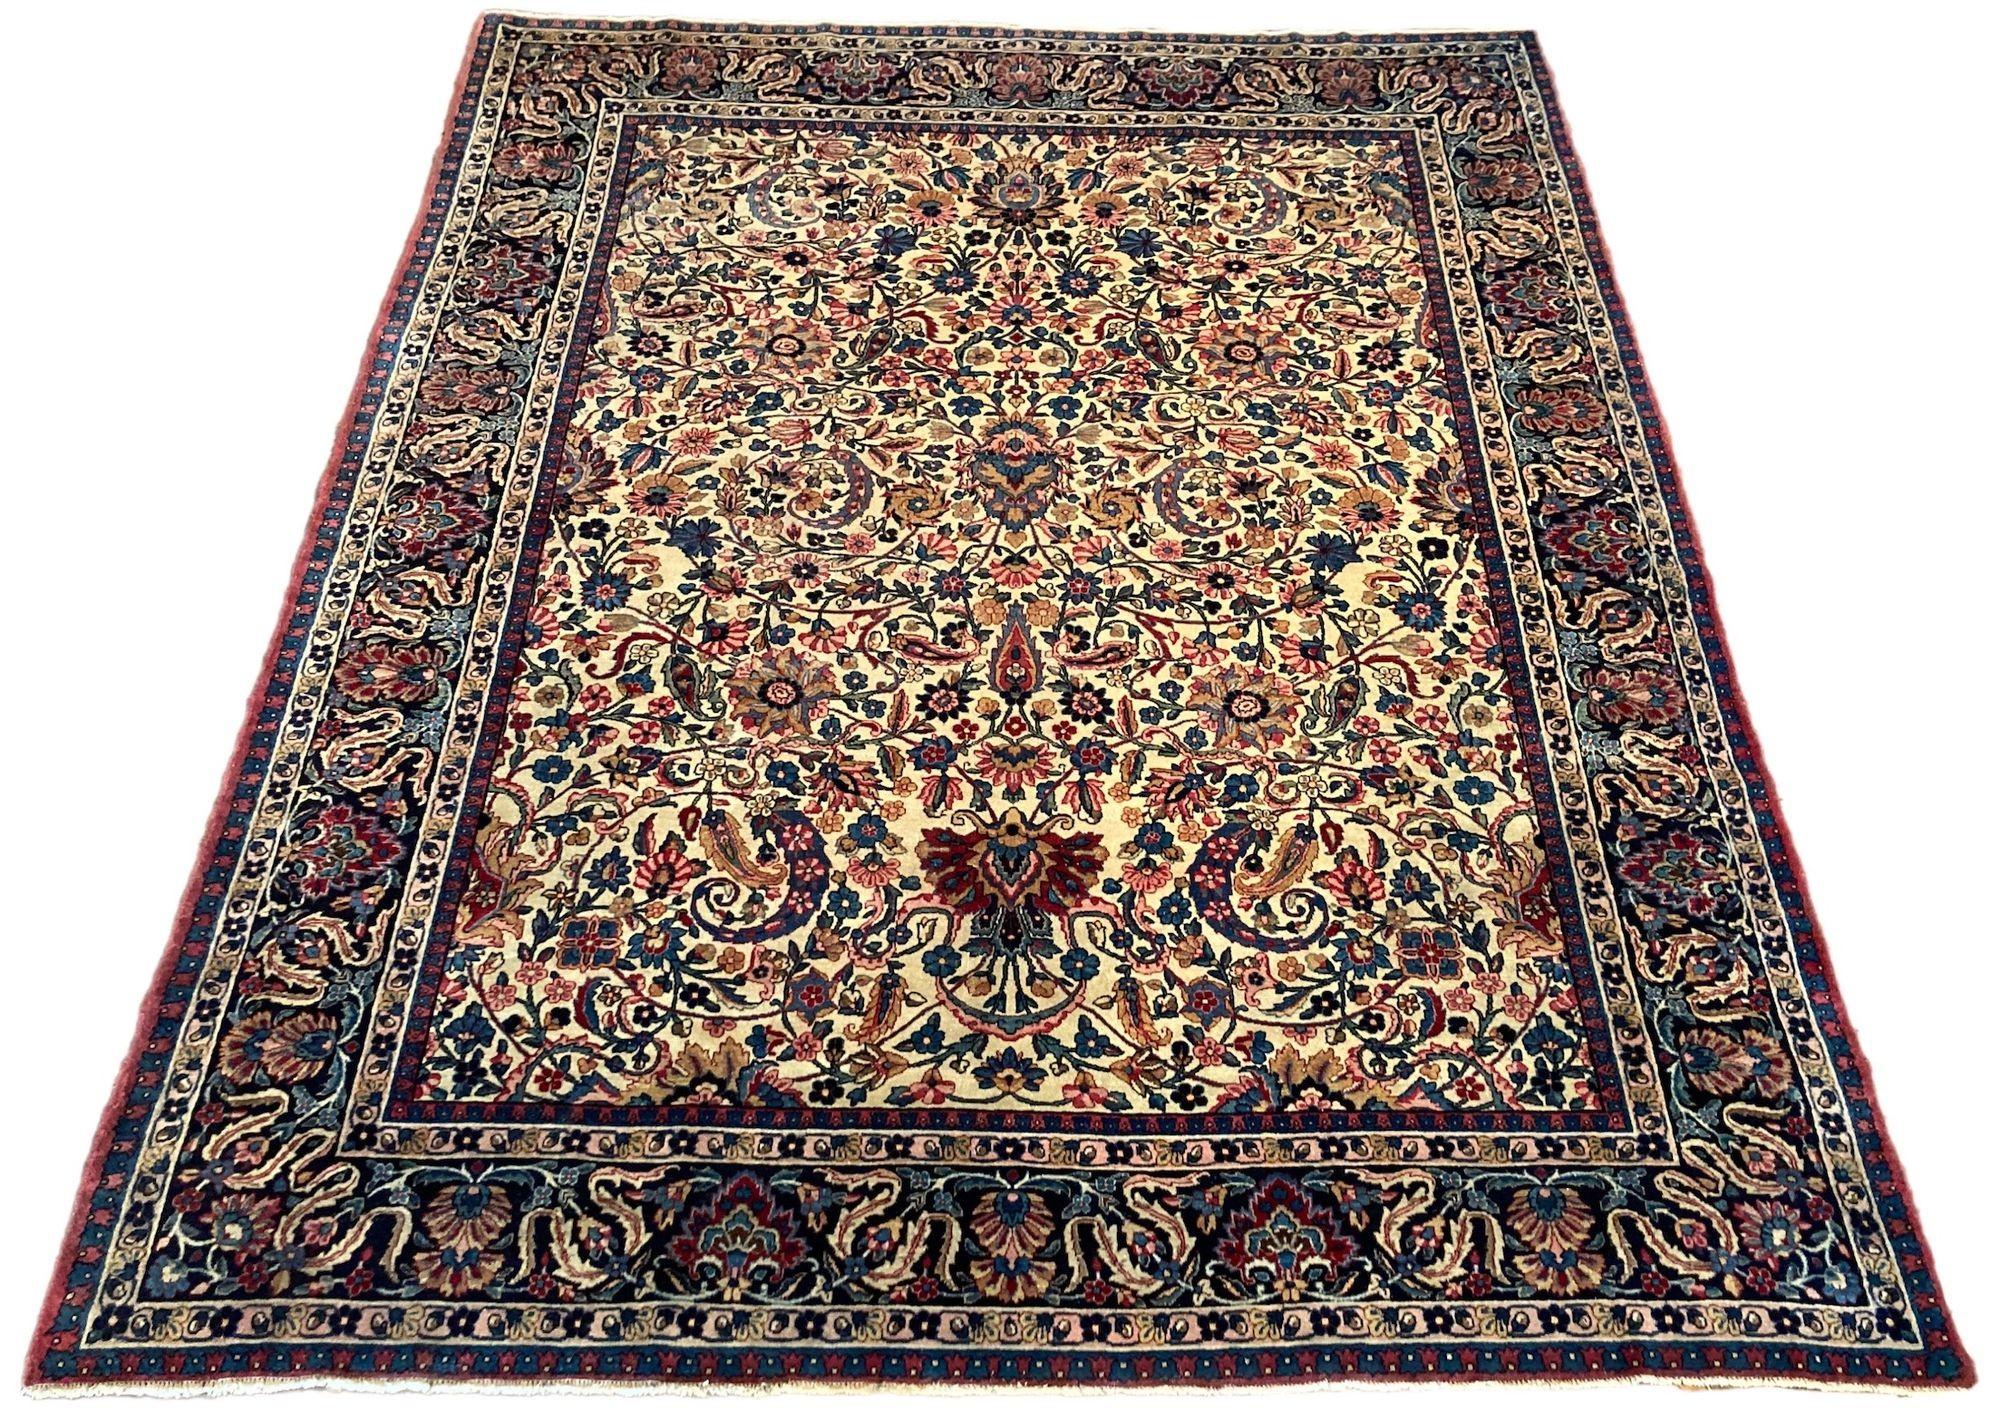 A fabulous antique Kerman Lavar carpet, handwoven circa 1910 featuring an allover floral design on an ivory field and deep indigo border. Finely woven with soft, silk like wool and secondary colours of reds, pinks and gold.
Size: 2.94m x 2.41m (9ft